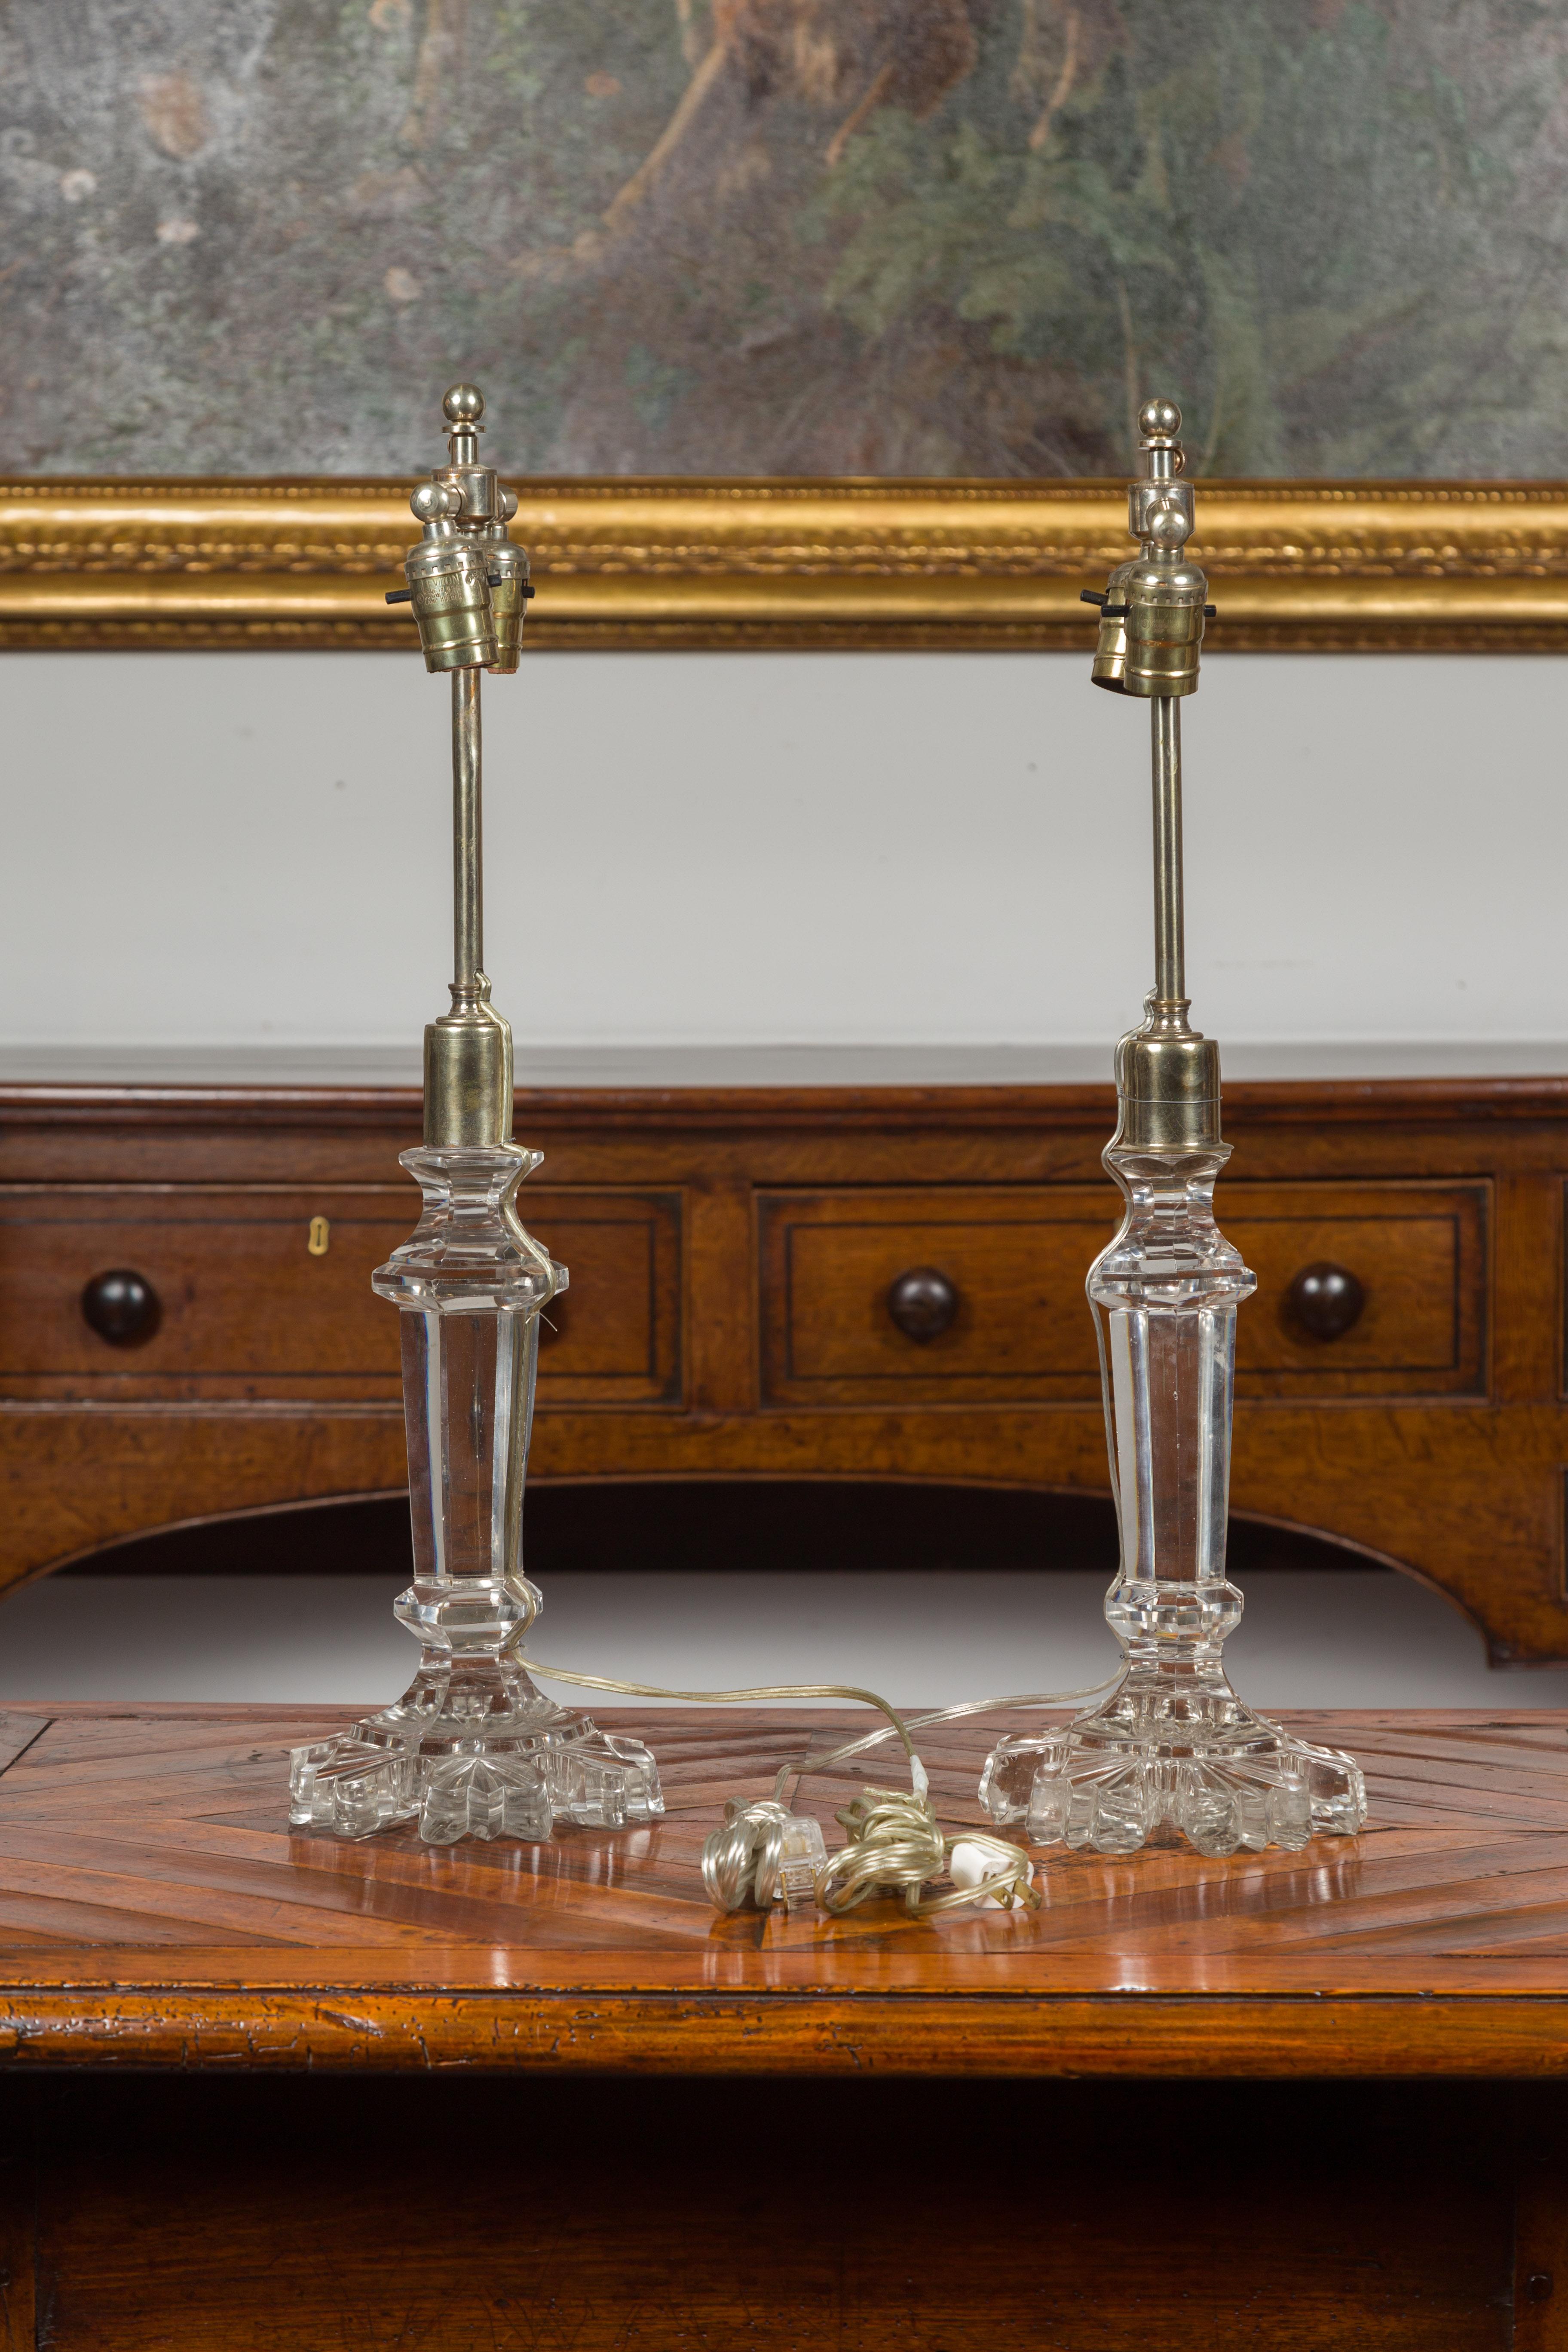 Pair of Irish Crystal 1850s Two-Light Table Lamps with Floral Shaped Bases For Sale 5